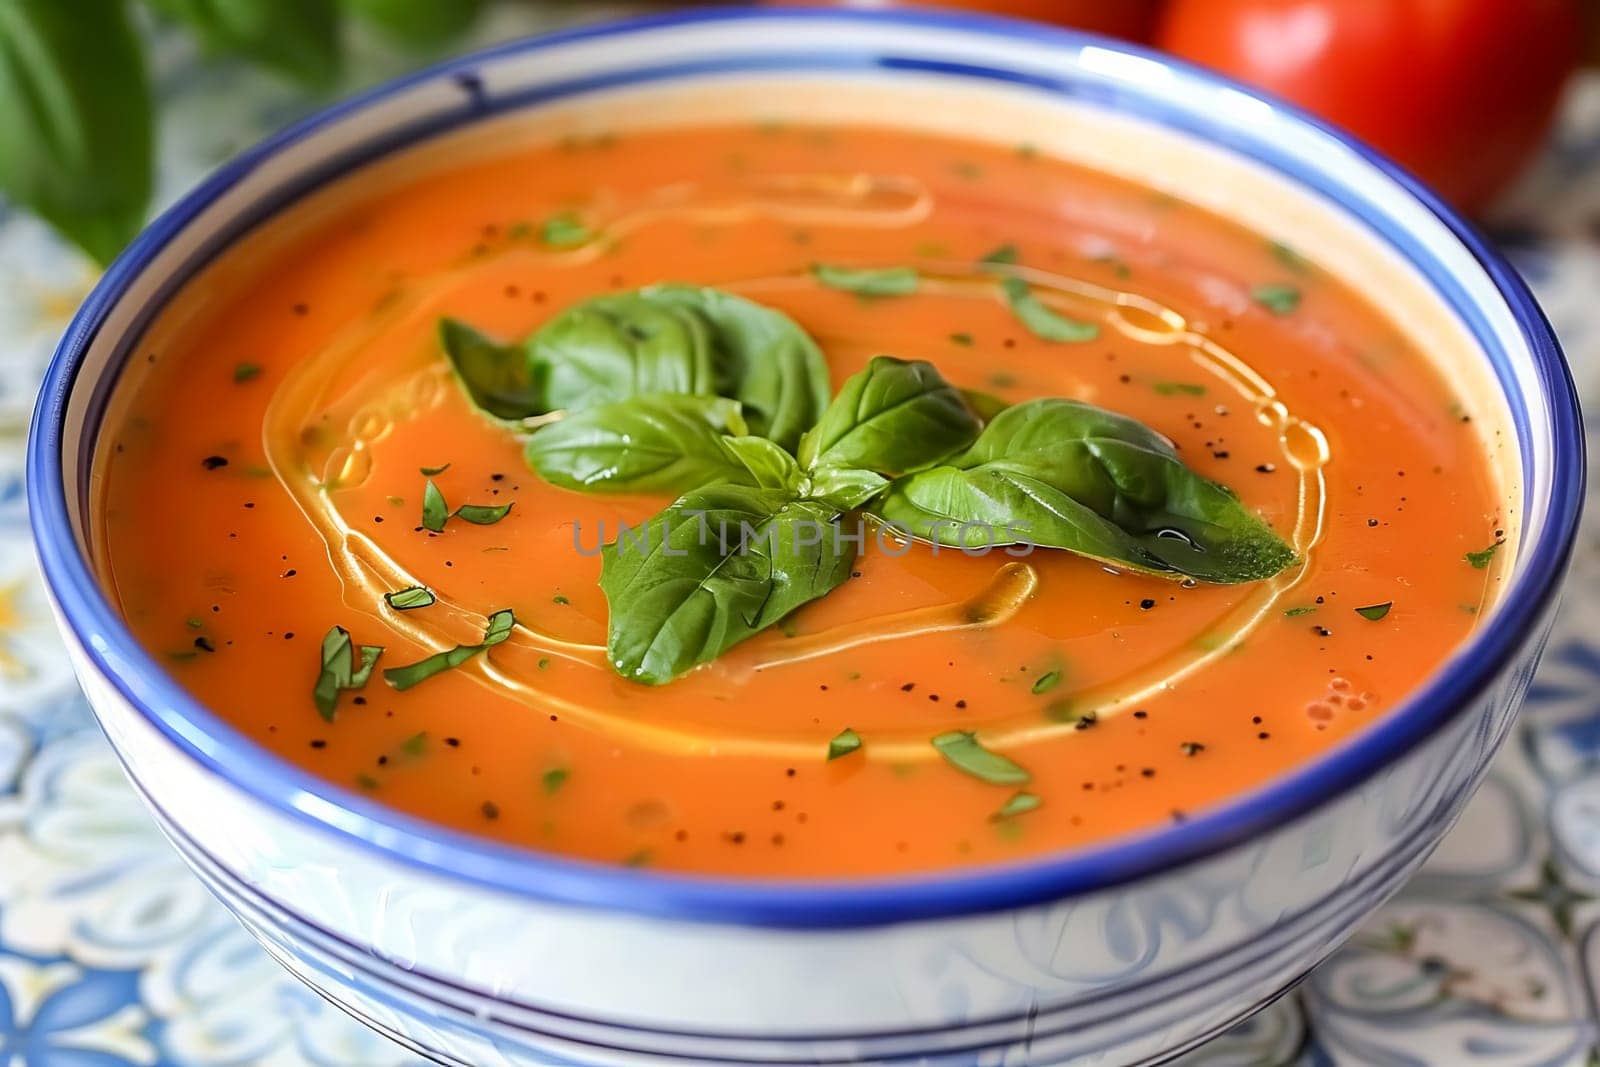 Spanish cold summer tomato soup gazpacho in a bowl with basil, on a white and blue tile surface. Healthy summer food.